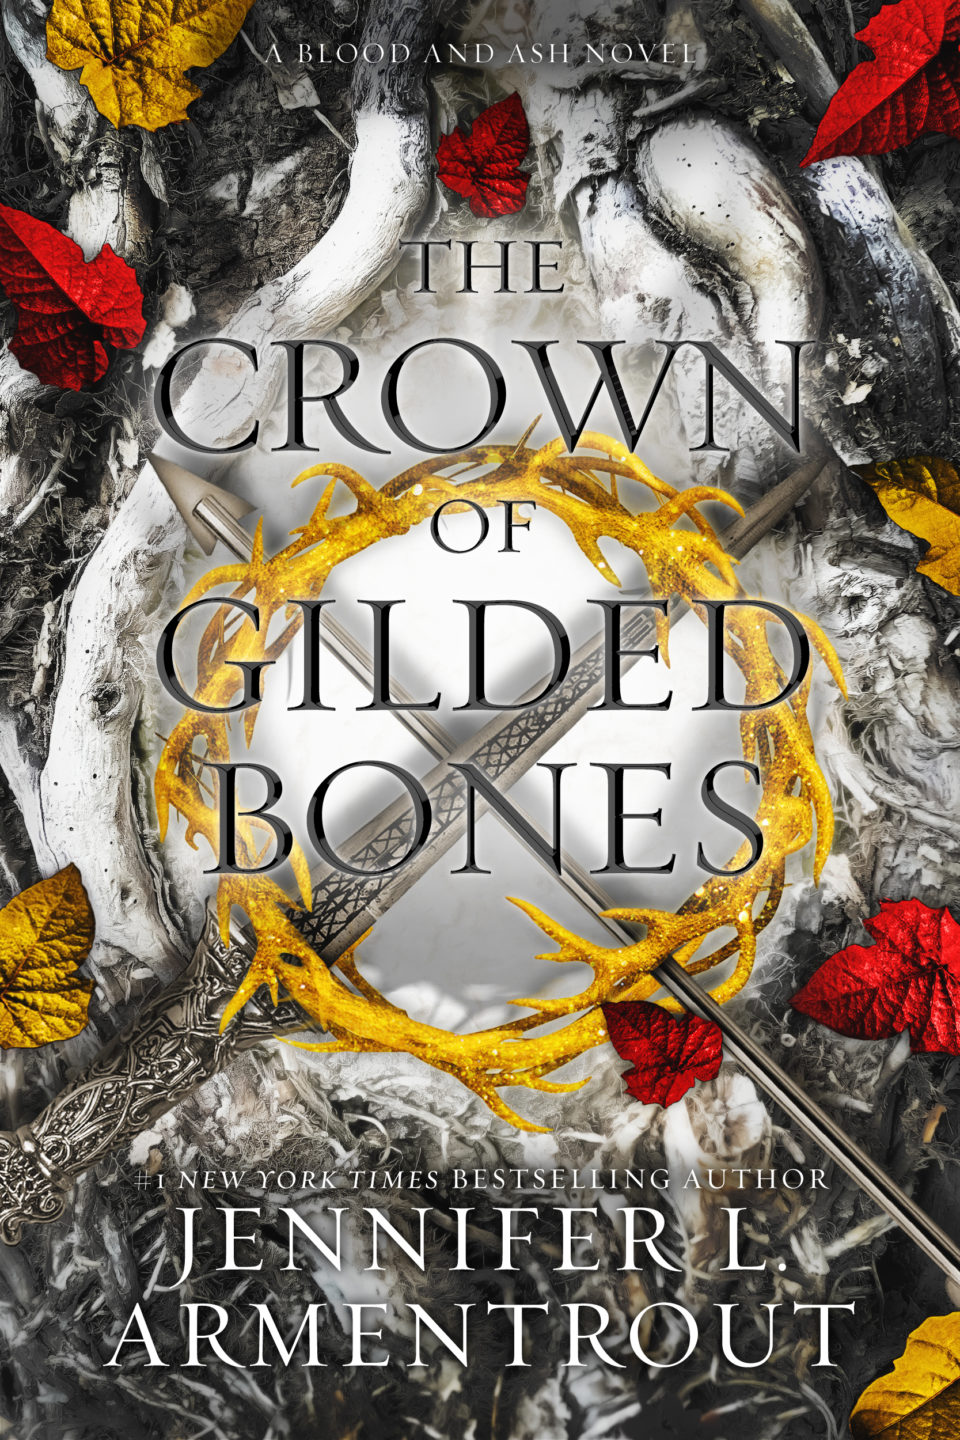 Review: The Crown of Gilded Bones